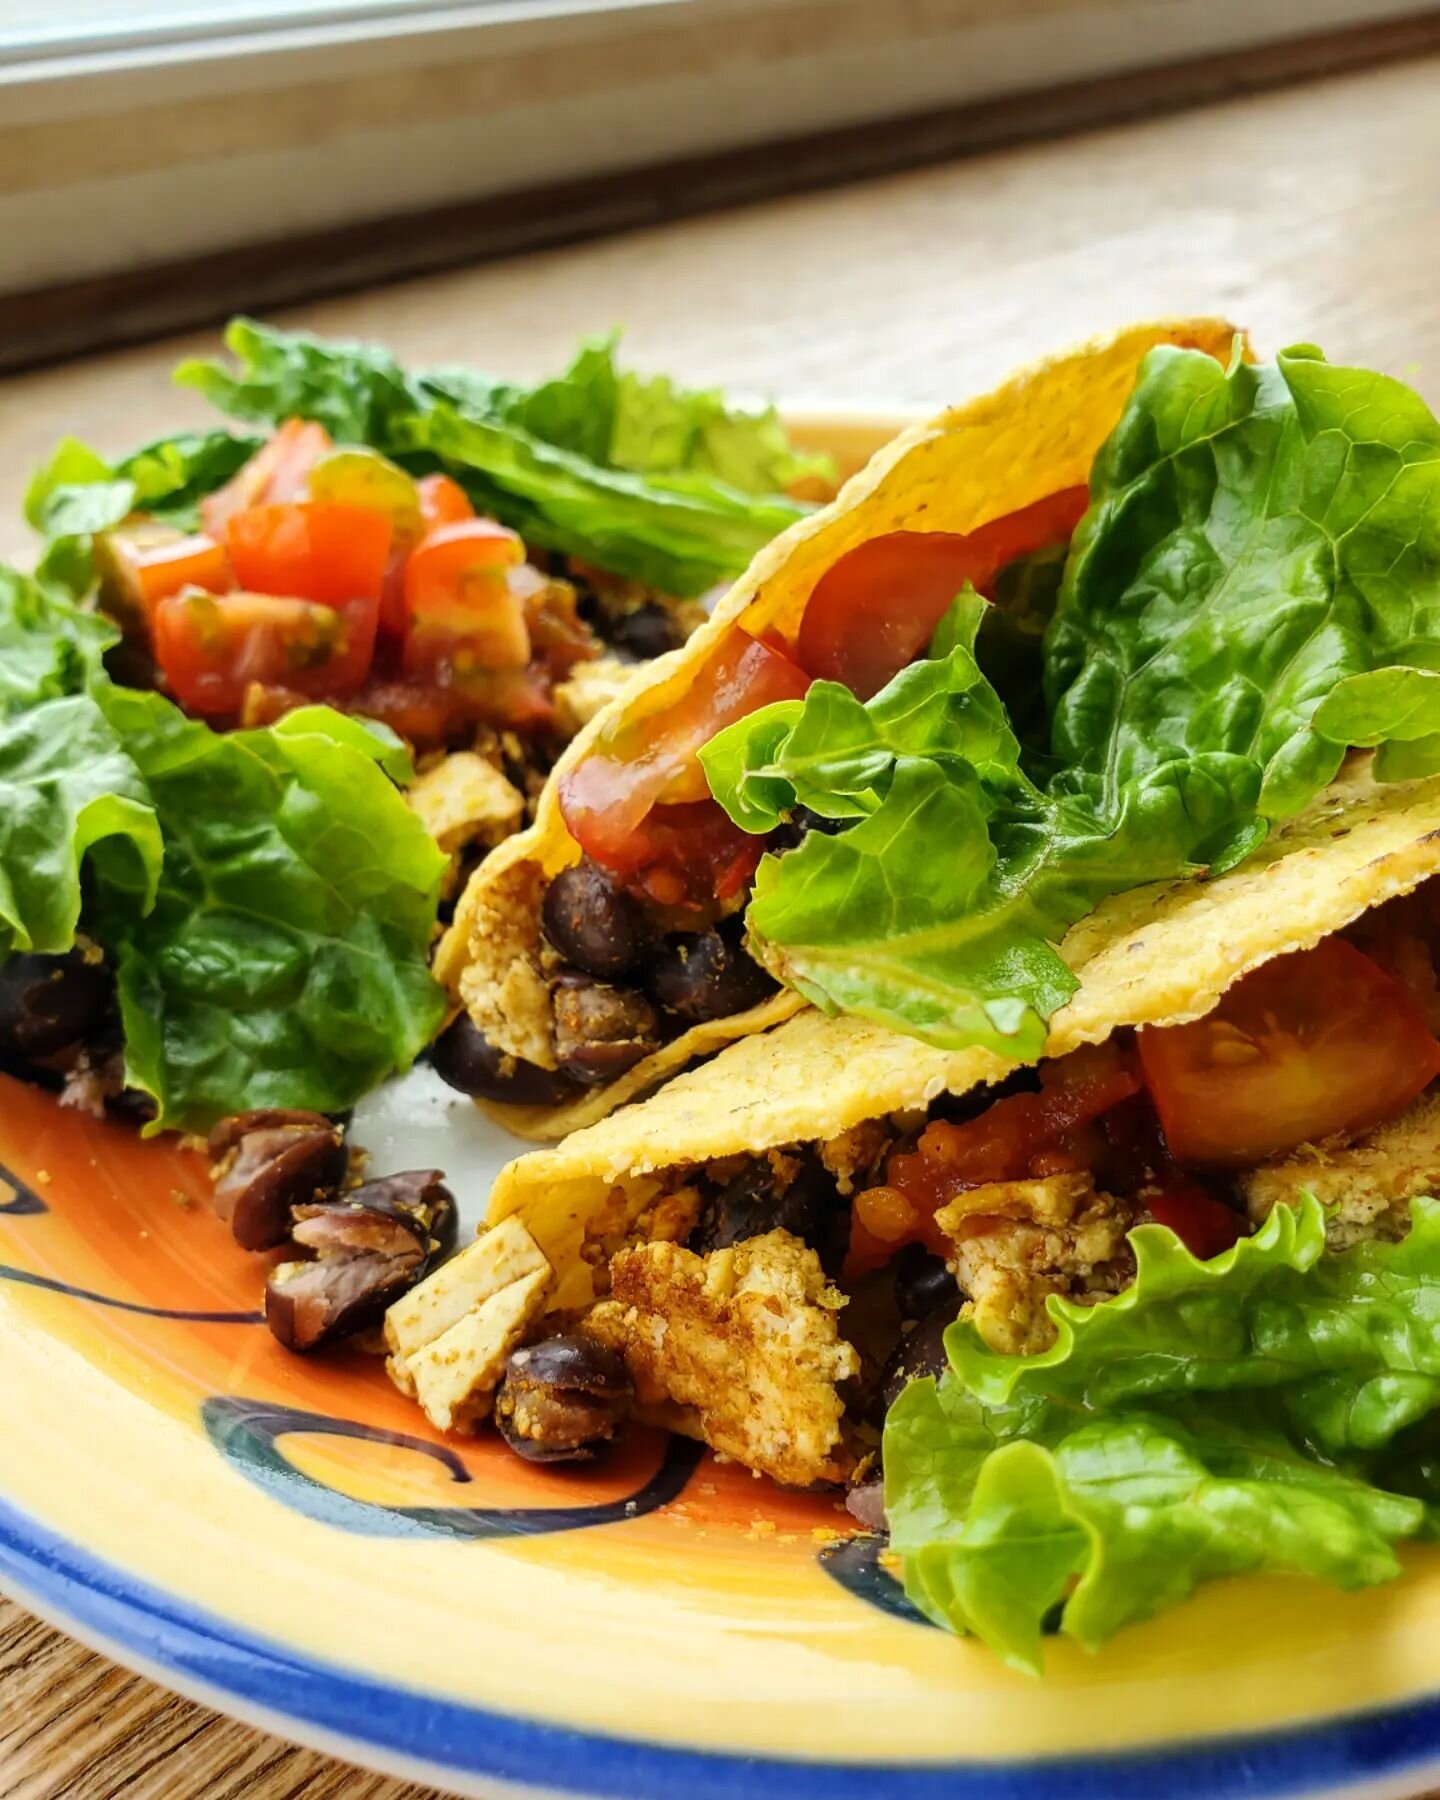 t a c o s 🌮

a lifetime favorite with a plant-based spin 🥬🍅

🌮 crumbled tofu &amp; black bean base; spiced with cumin, chili powder, curry powder, pepper &amp; salt
🌮 cherry tomatoes &amp; romaine 
🌮 homemade canned salsa
🌮 nutritional yeast
?